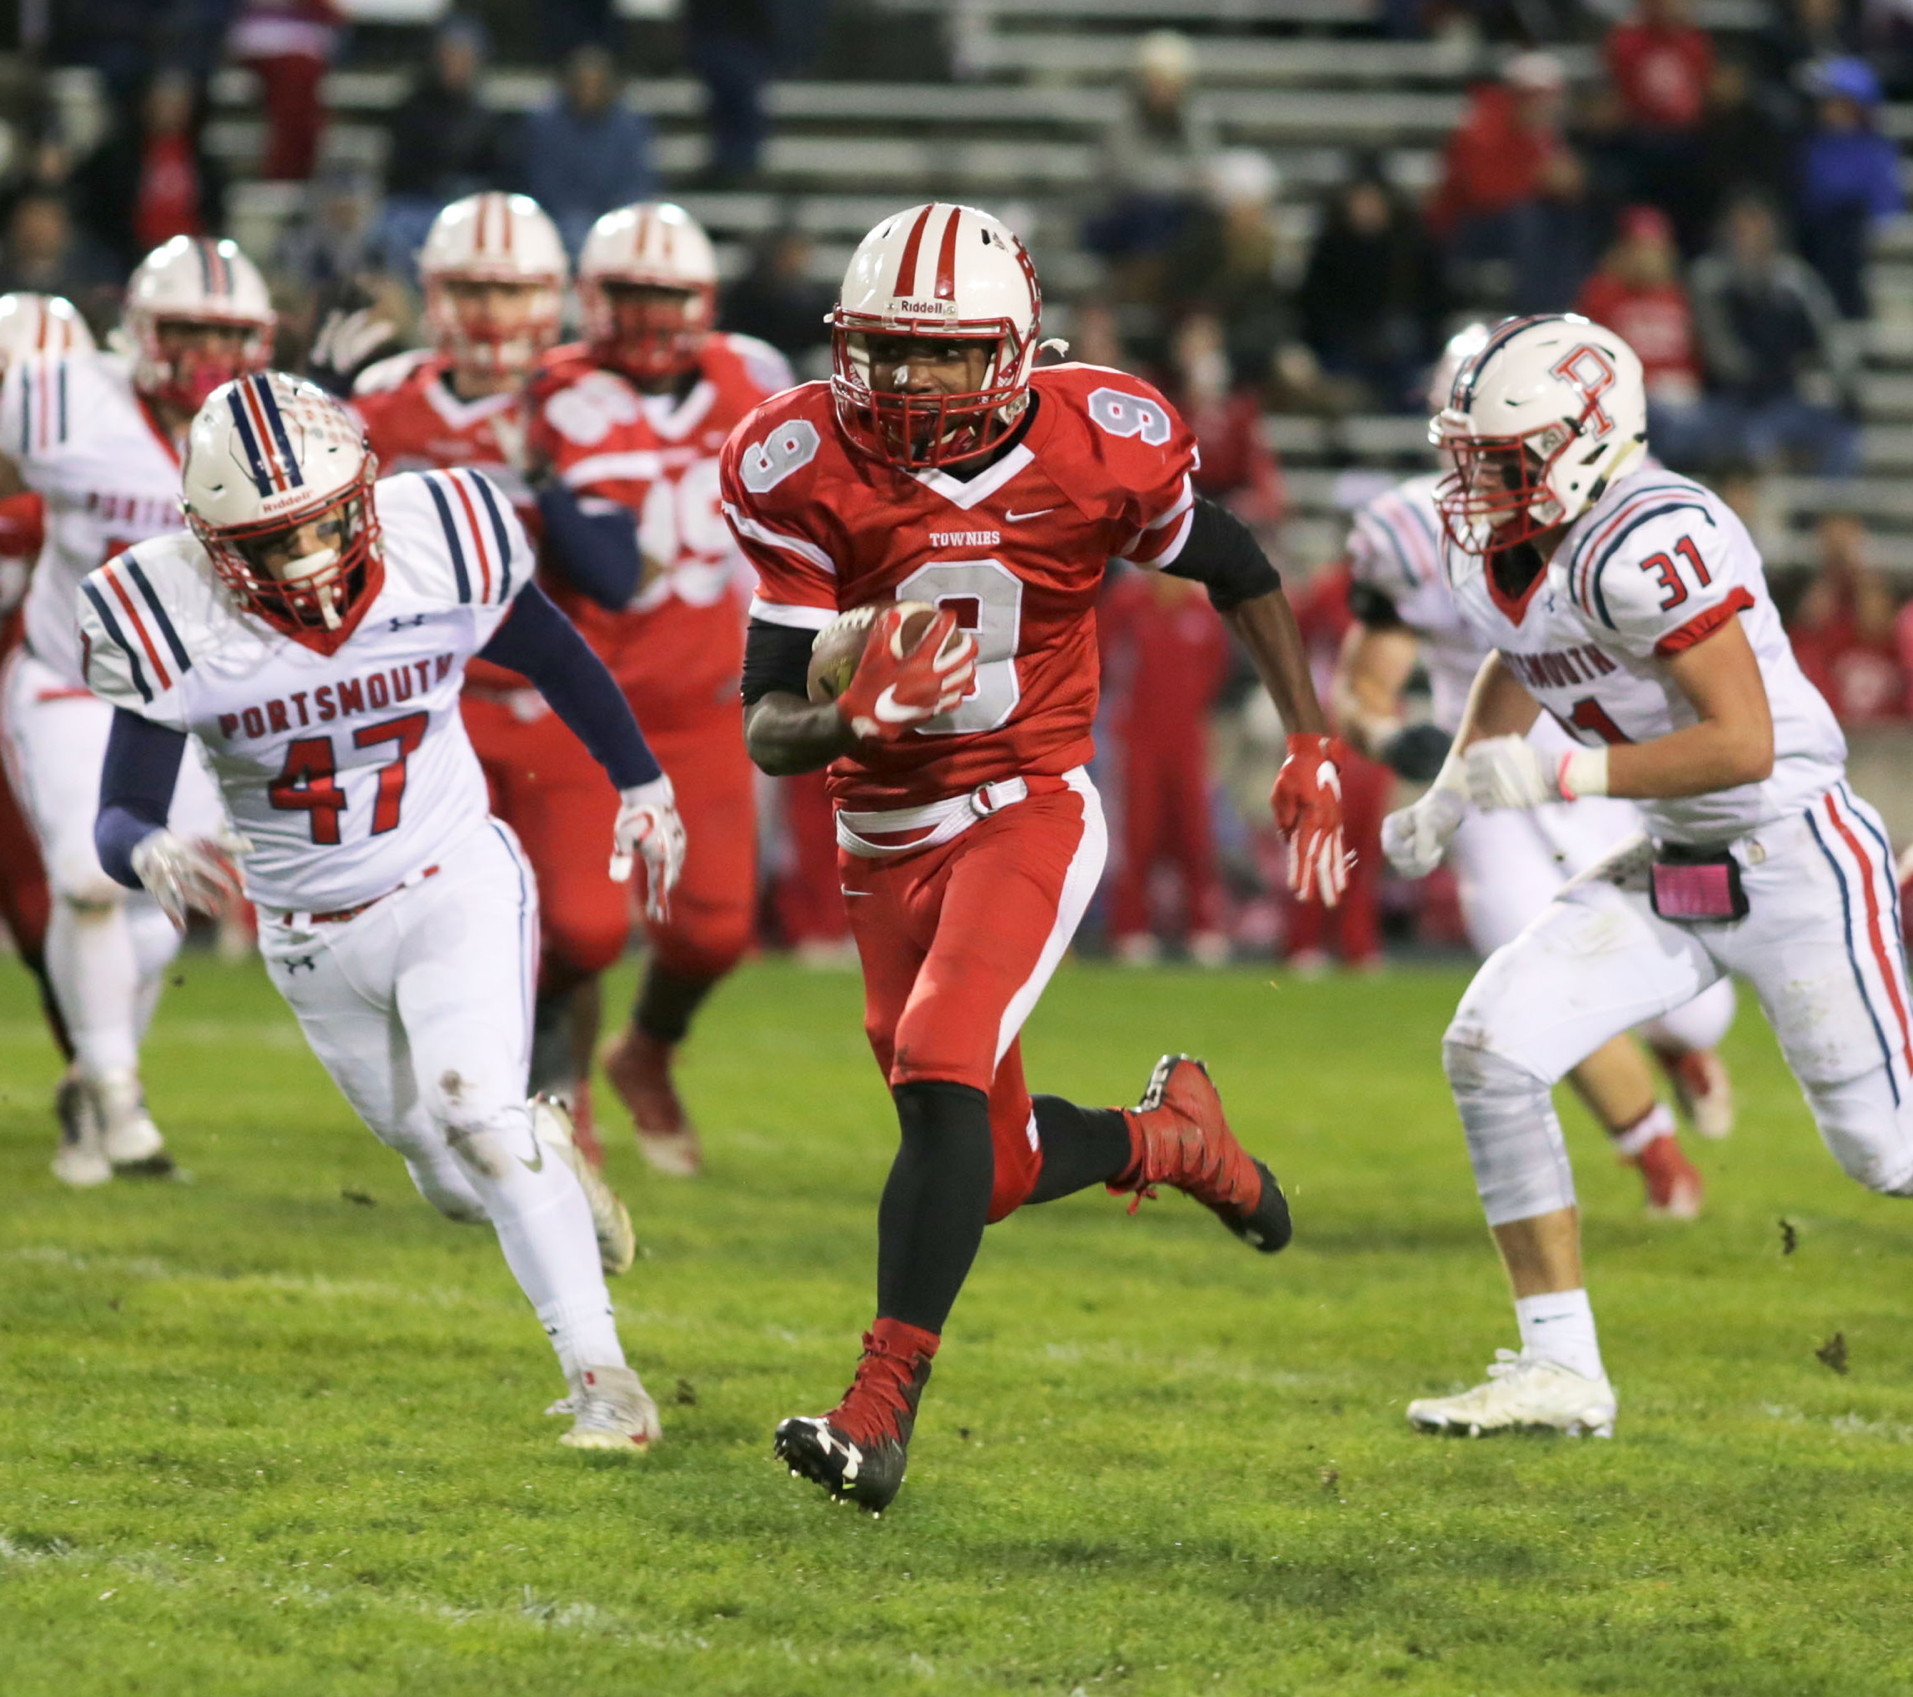 Sophomore Dion Hazard breaks away from Portsmouth defenders and runs for a touchdown.